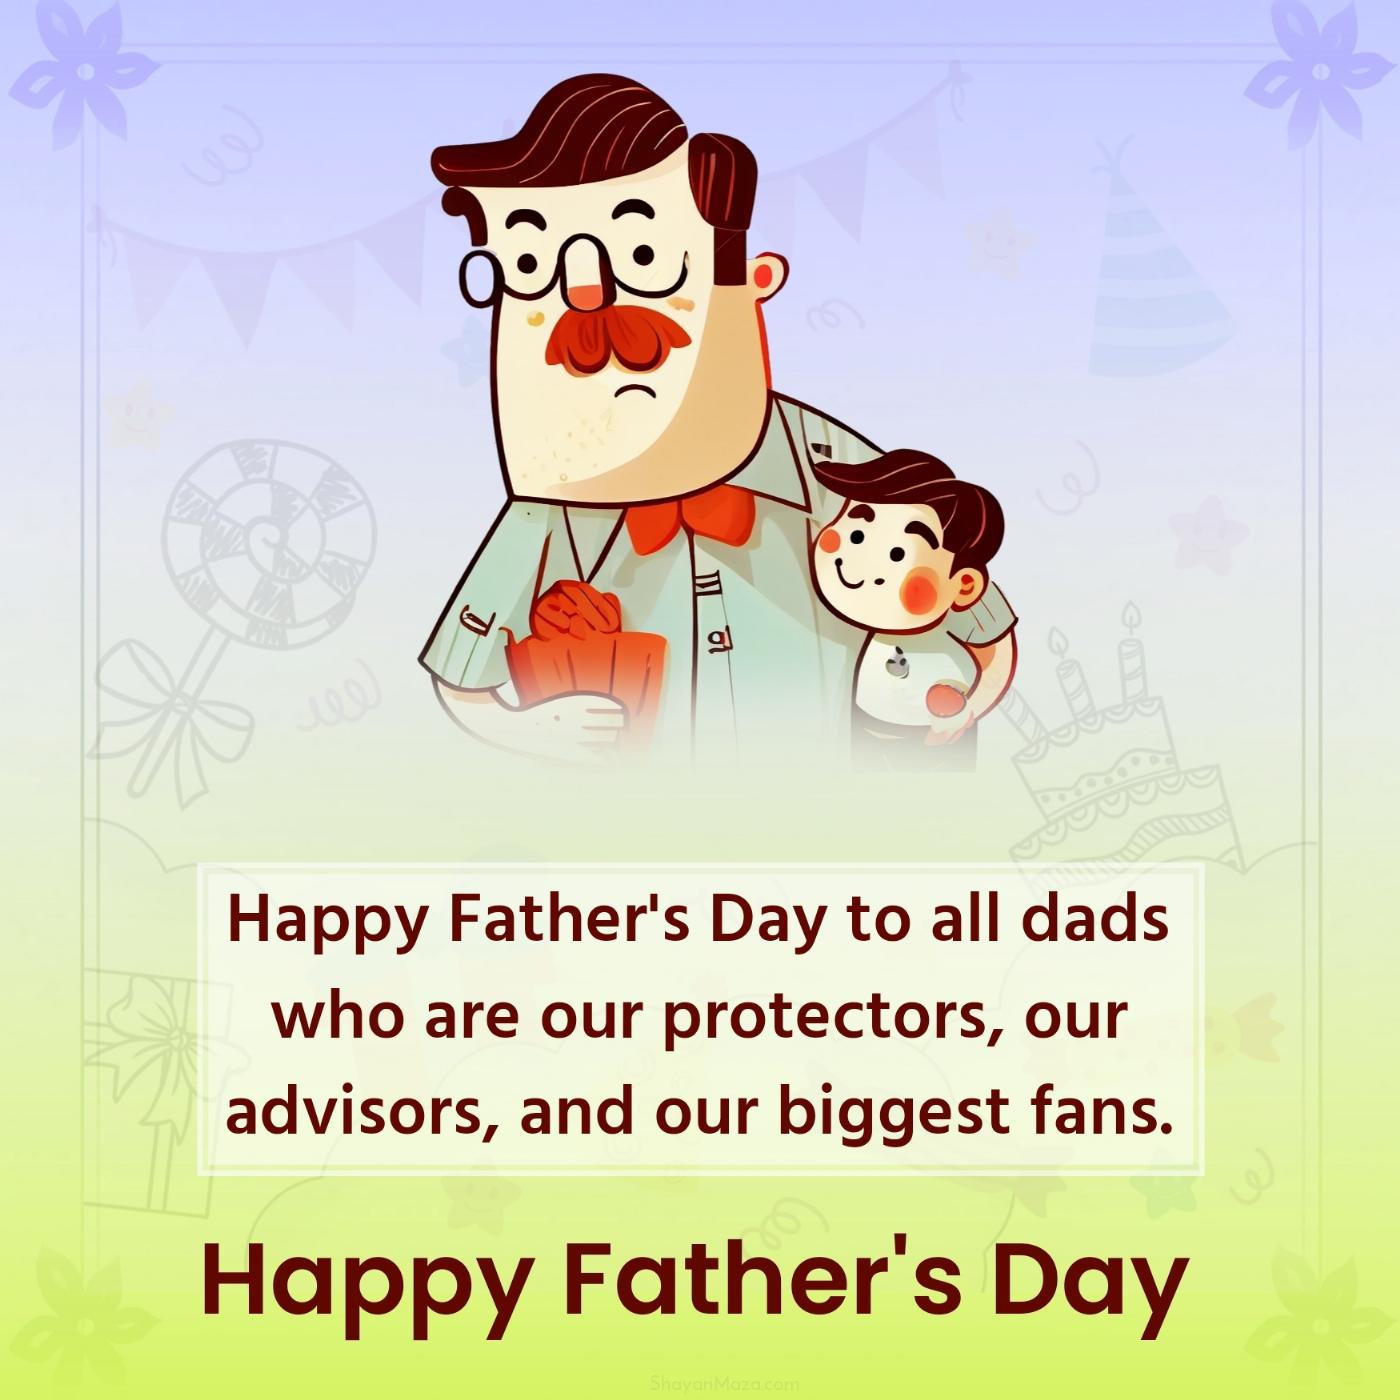 Happy Father's Day to all dads who are our protectors